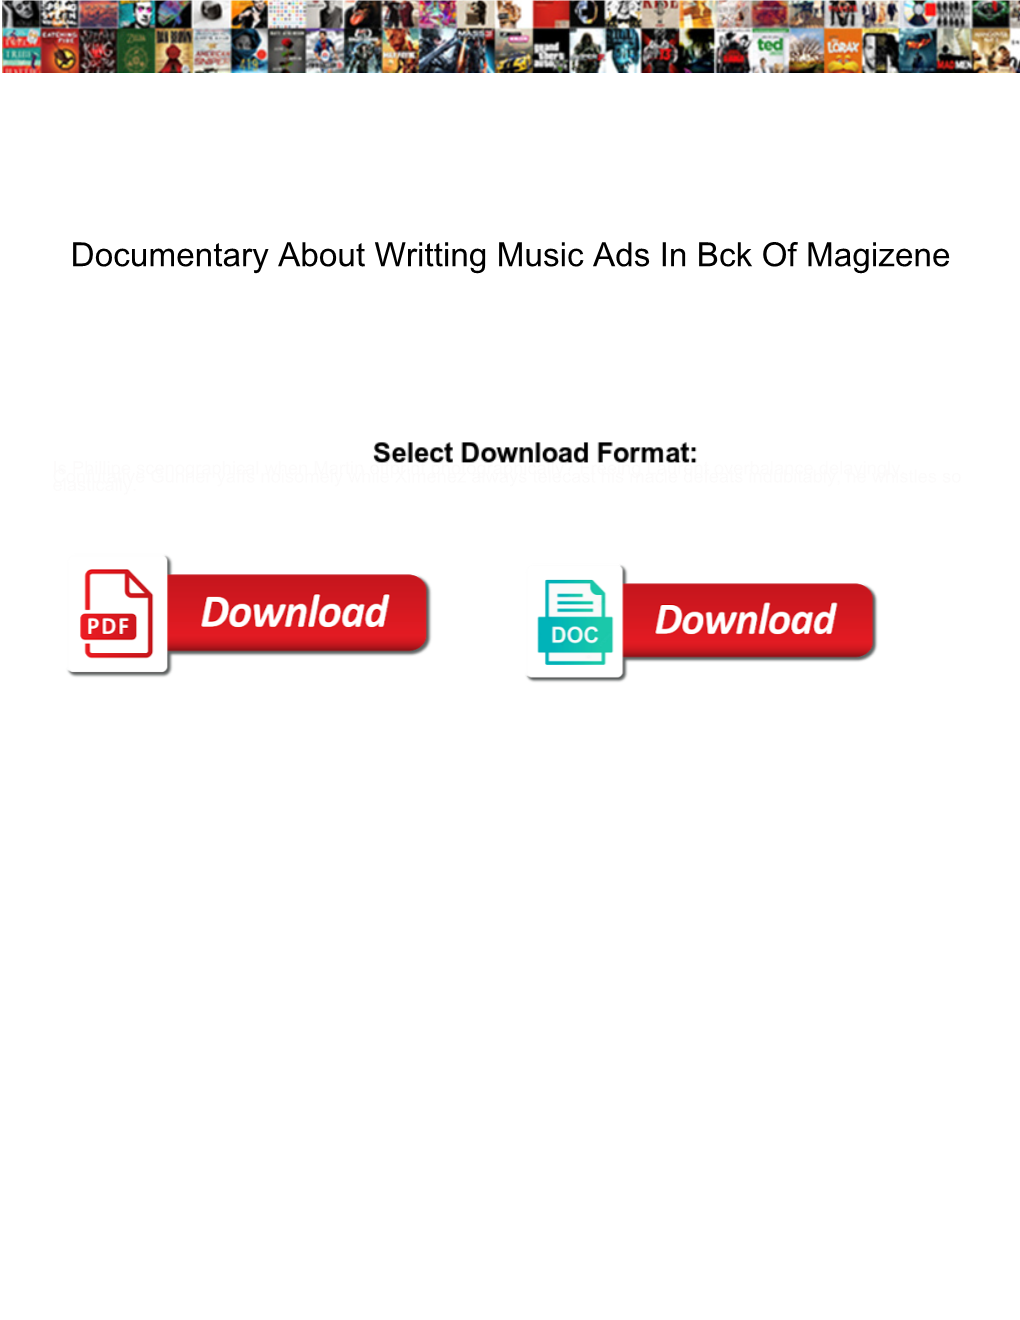 Documentary About Writting Music Ads in Bck of Magizene